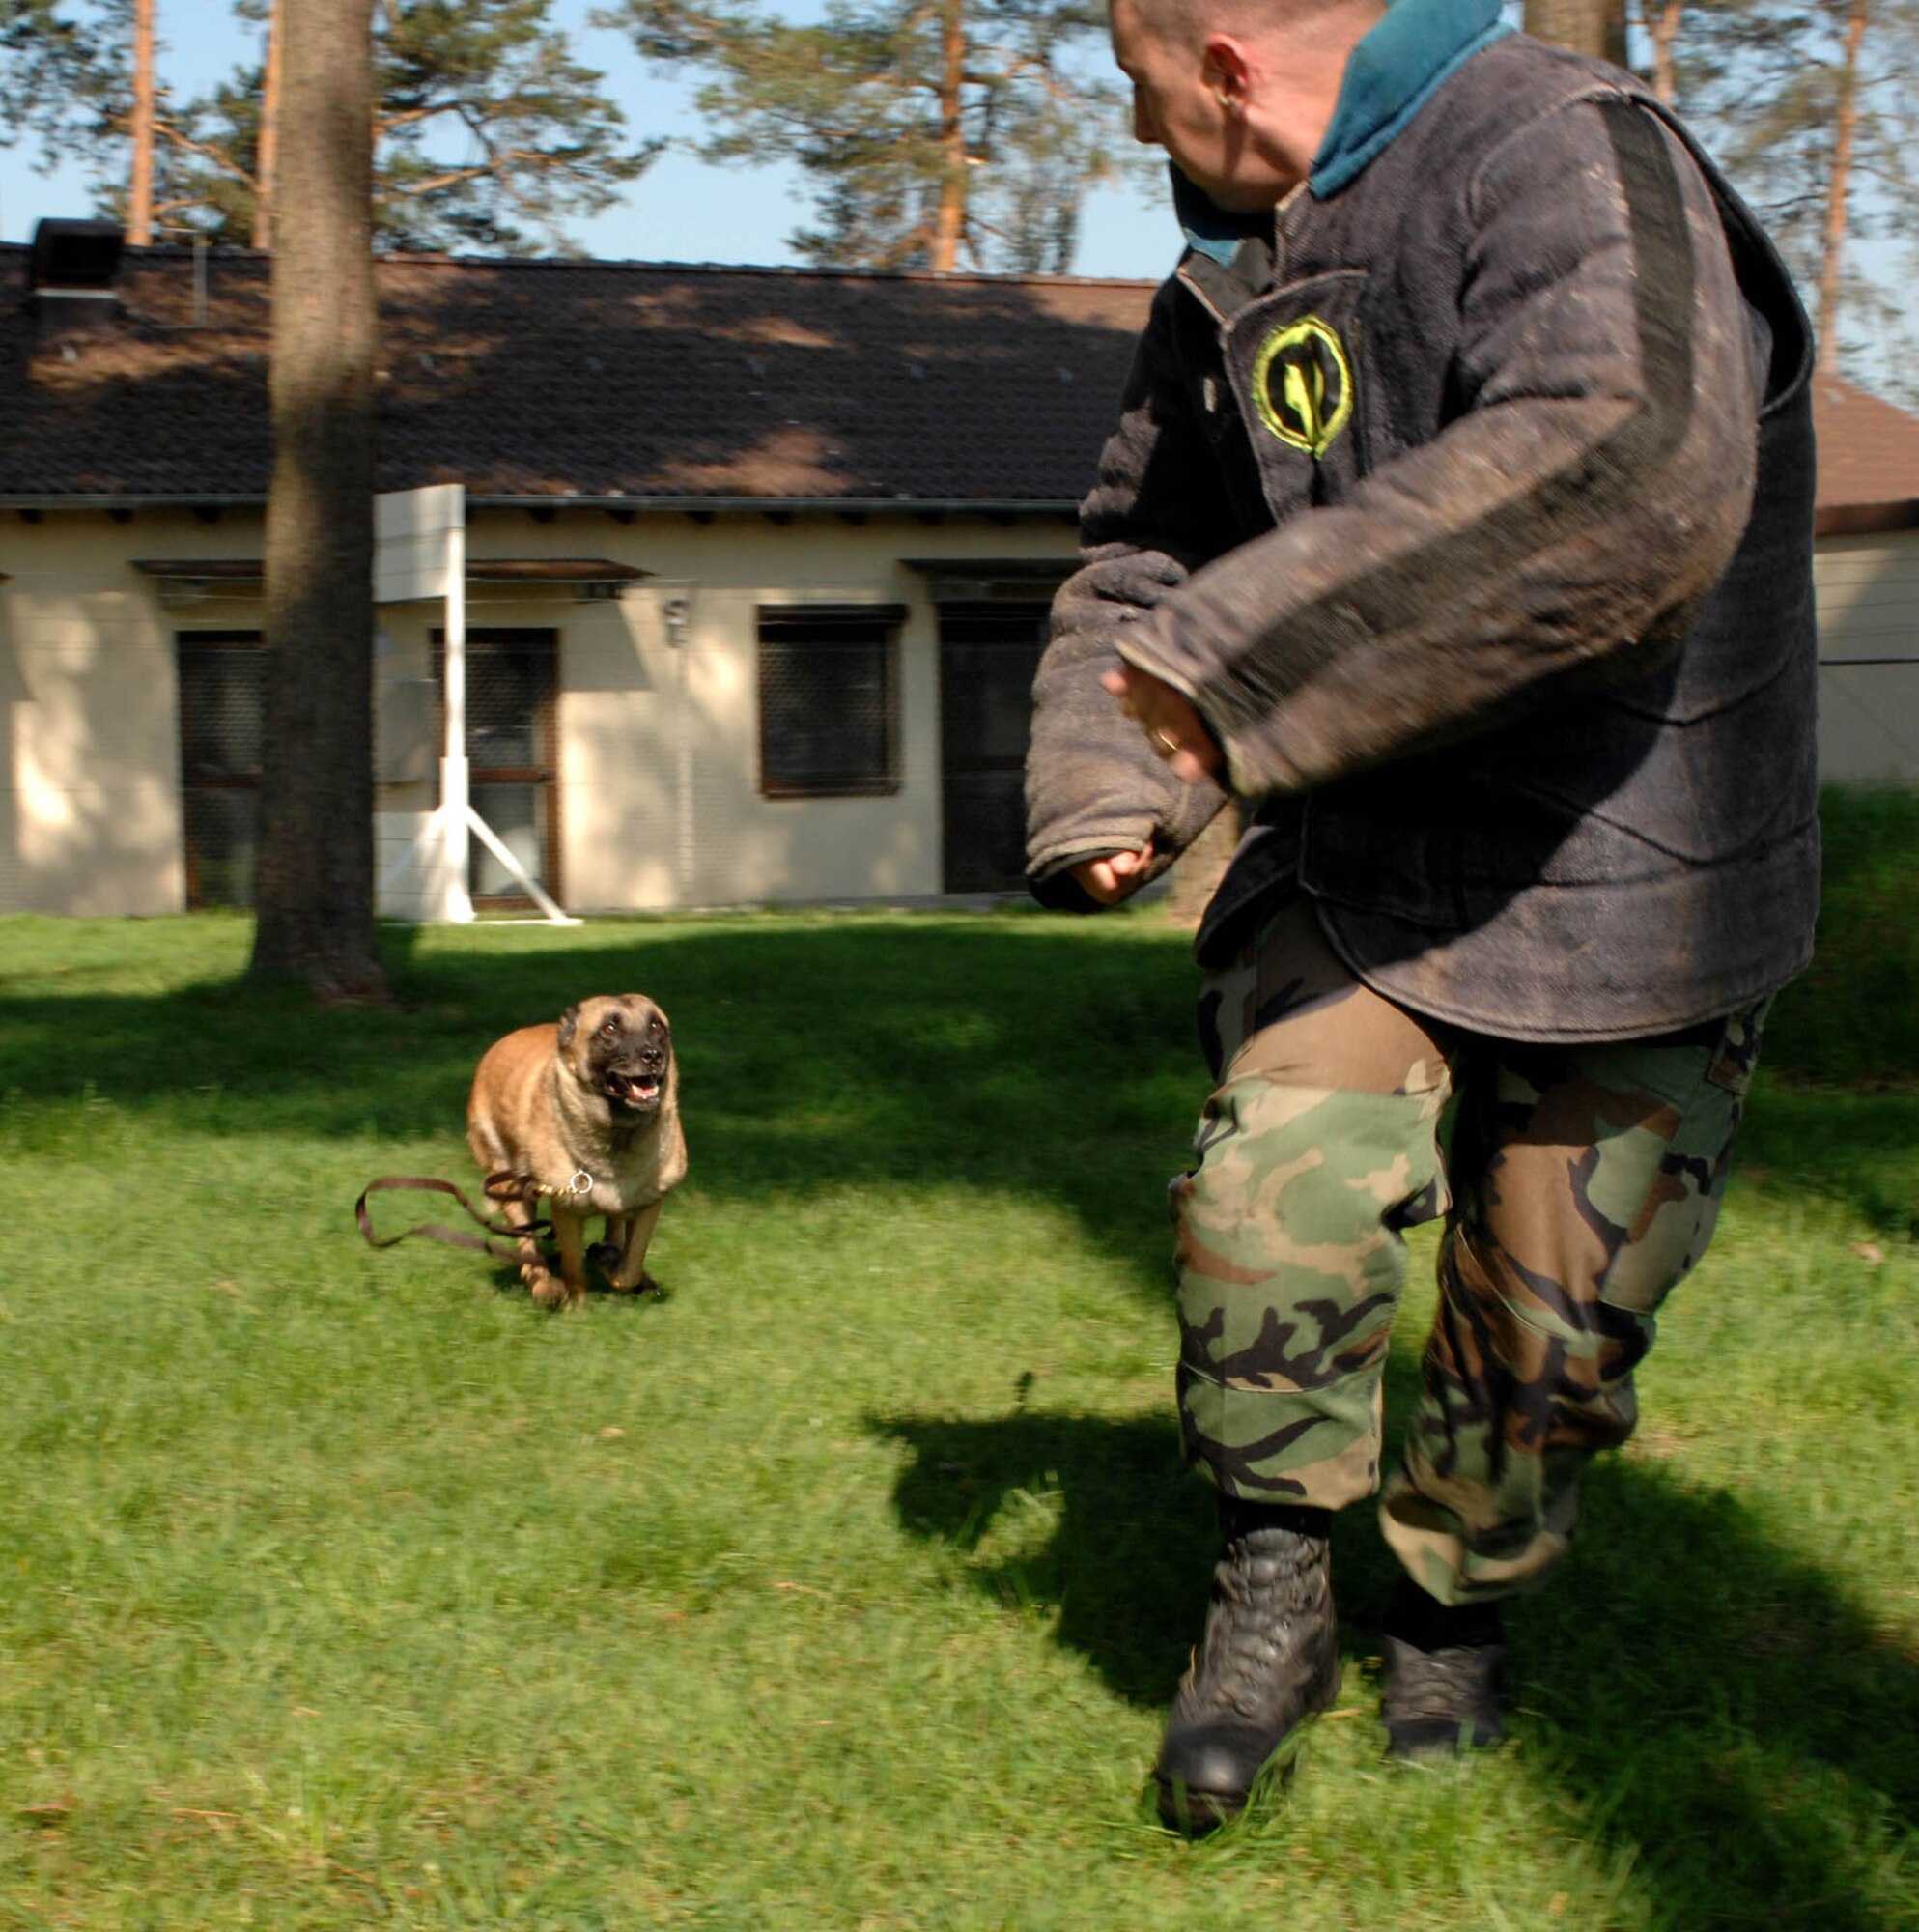 SPANGDAHLEM AIR BASE, GERMANY -- Staff Sgt. Mitchell Stein, 52nd Security Forces military working dog handler, is chased by Laika, a Belgian Malinois MWD, during an aggressive training exercise, here May 22, 2007. The training is designed to prepare the dog for any situation they may face in the field. (U.S. Air Force photo/Airman 1st Class Stephanie Clark) 